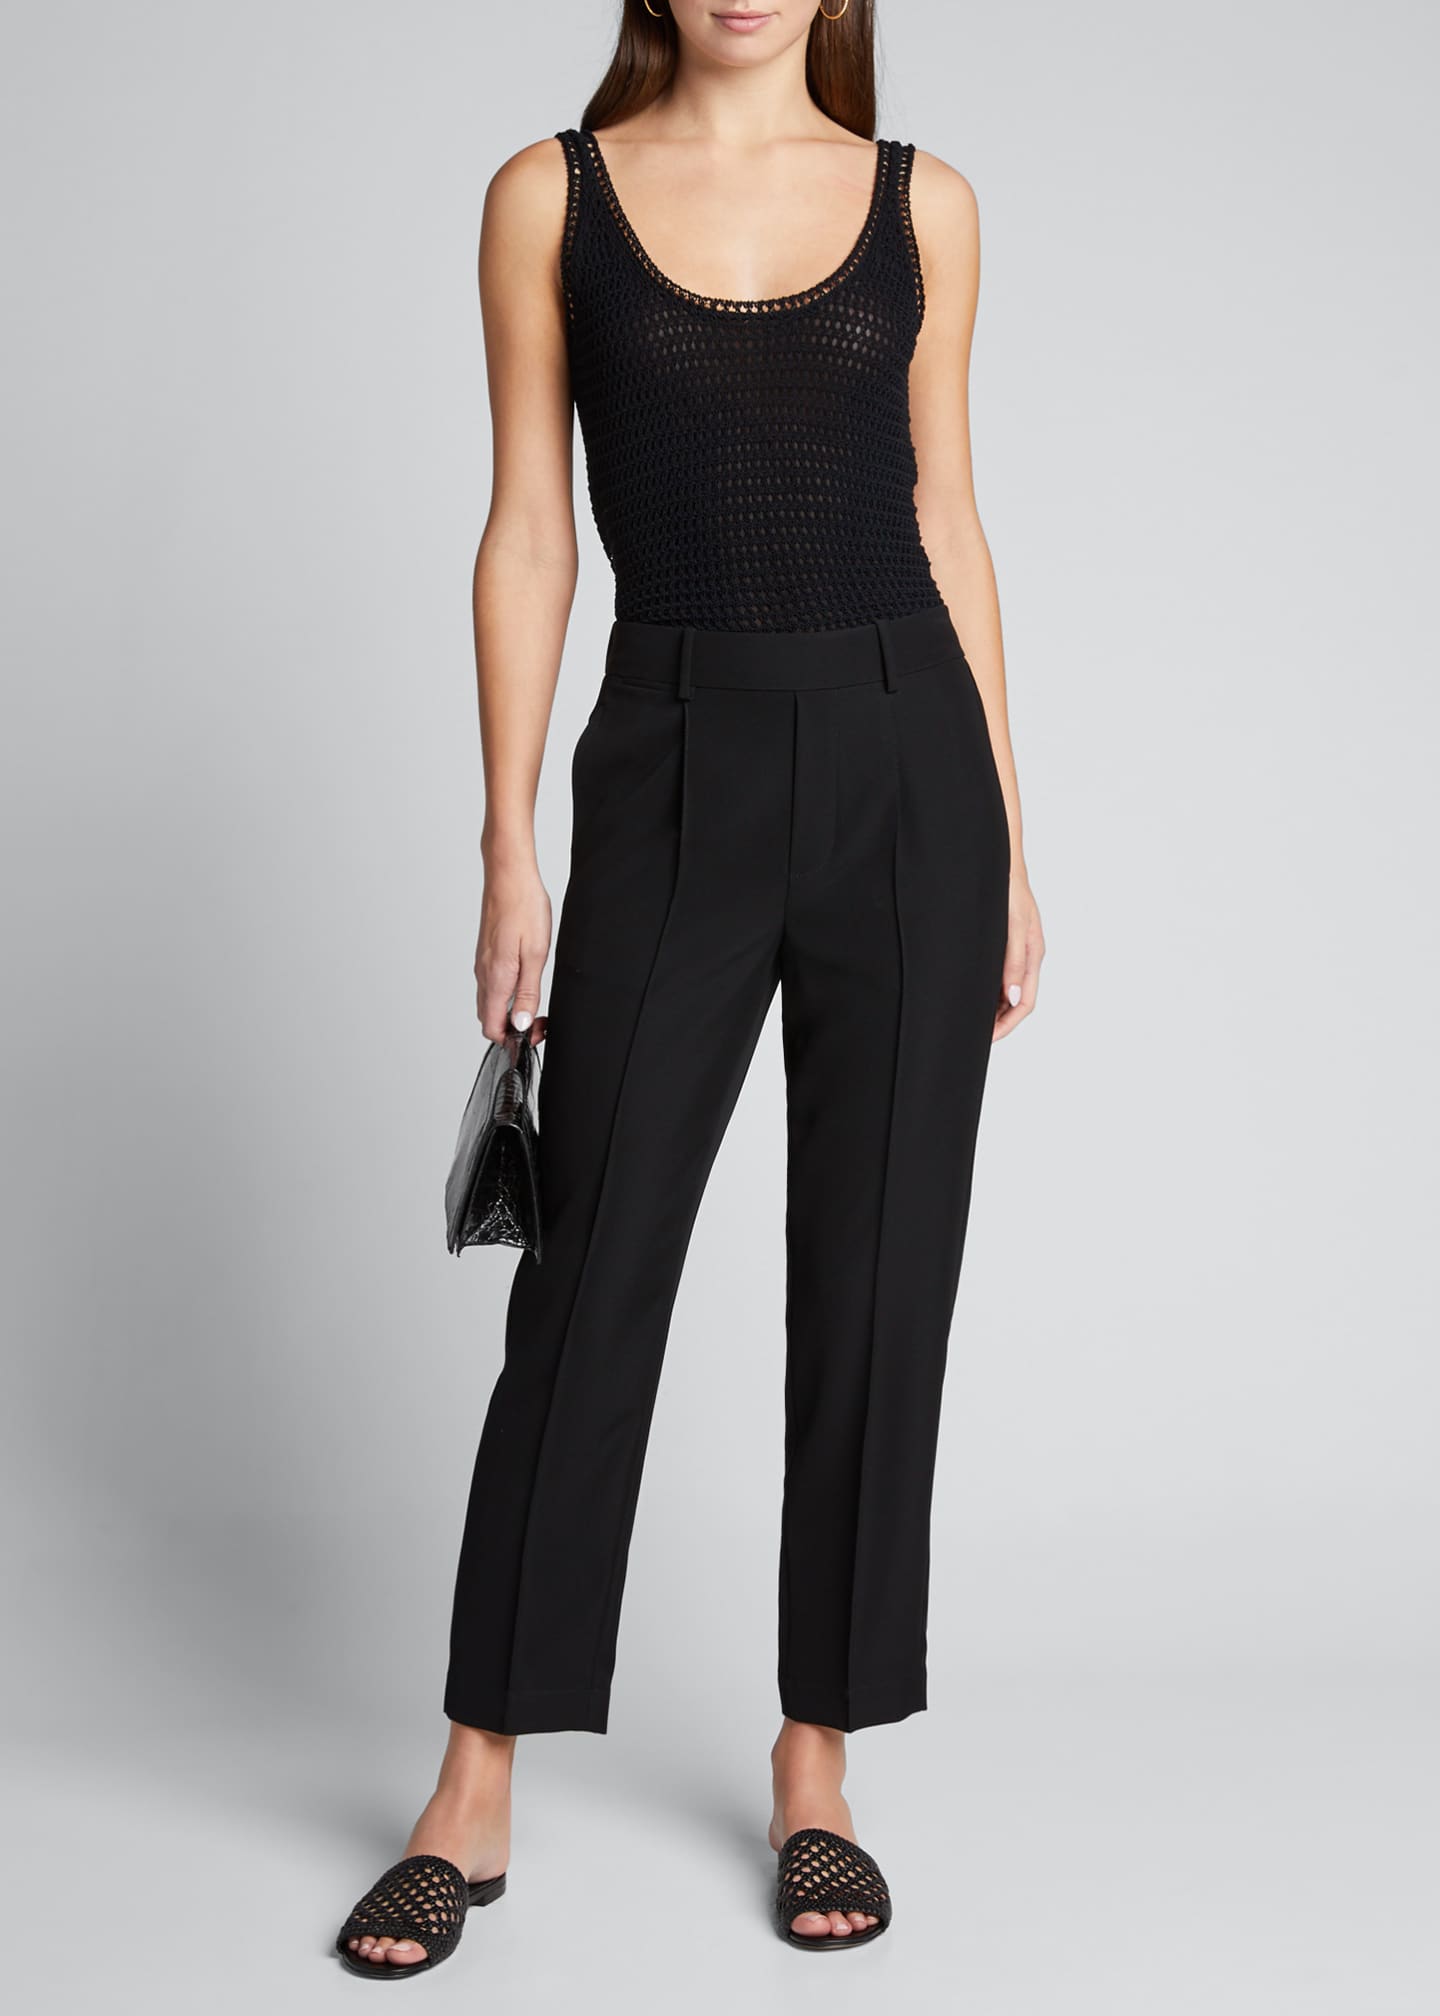 Vince Tapered Pull-On Pants - Bergdorf Goodman